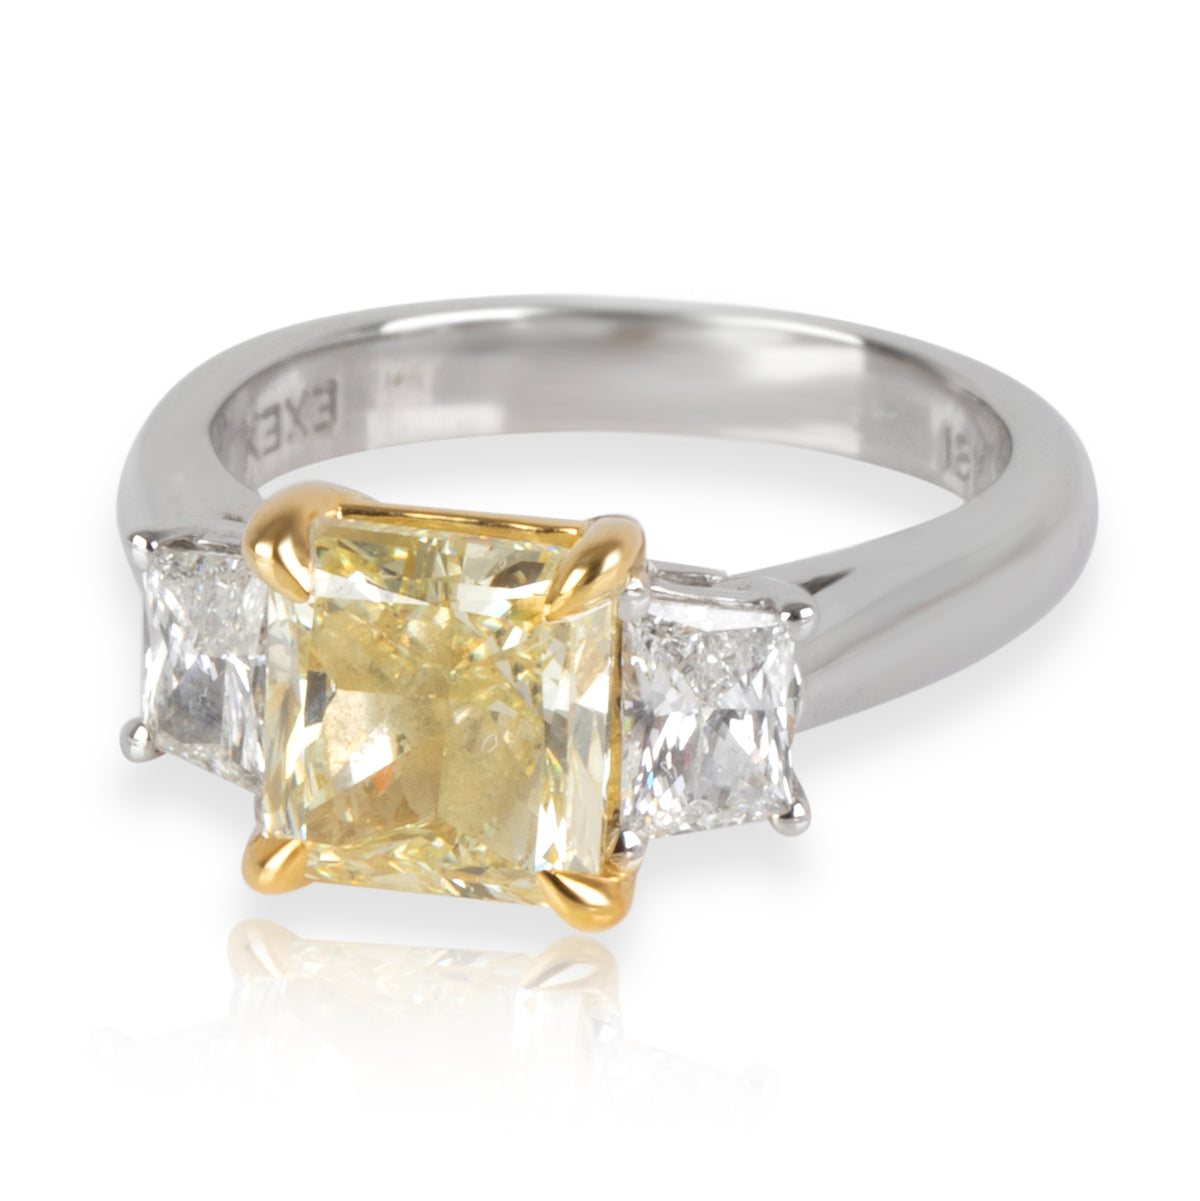 Fancy Yellow Diamond Engagement Ring in Platinum GIA Certified VS2 2.13 CTW